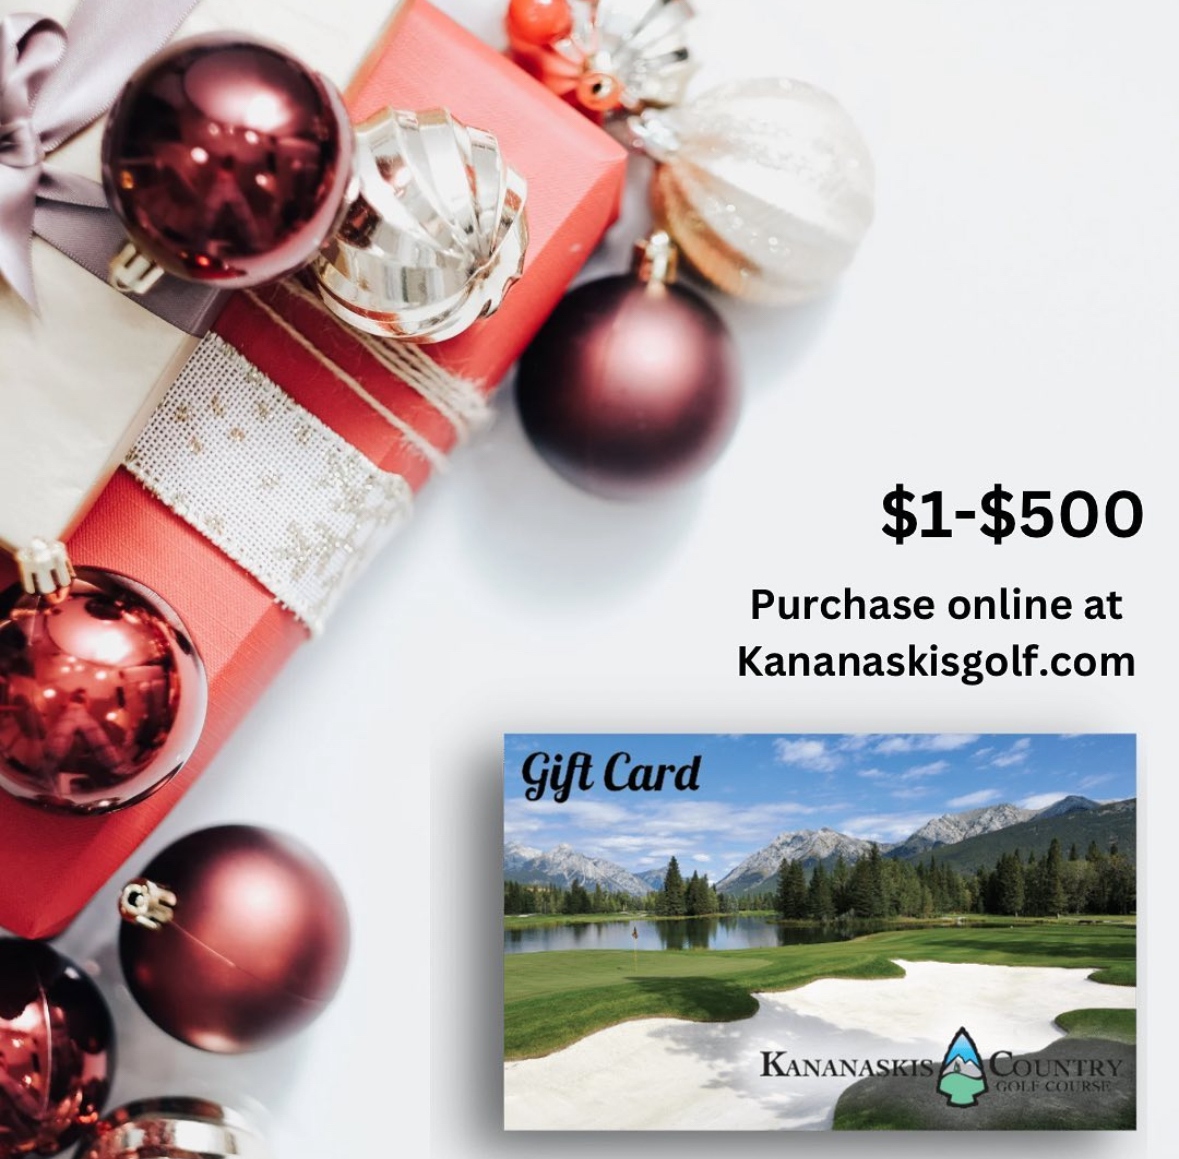 The online gift cards on Kananaskisgolf.com are incredibly convenient for your Christmas Shopping from home

Message us if you have any questions! 

#PlayTheK #makethetime #kananaskis #explorekananaskis #golfalberta #golf #golfswing #golfshop #kcountry #albertaparks